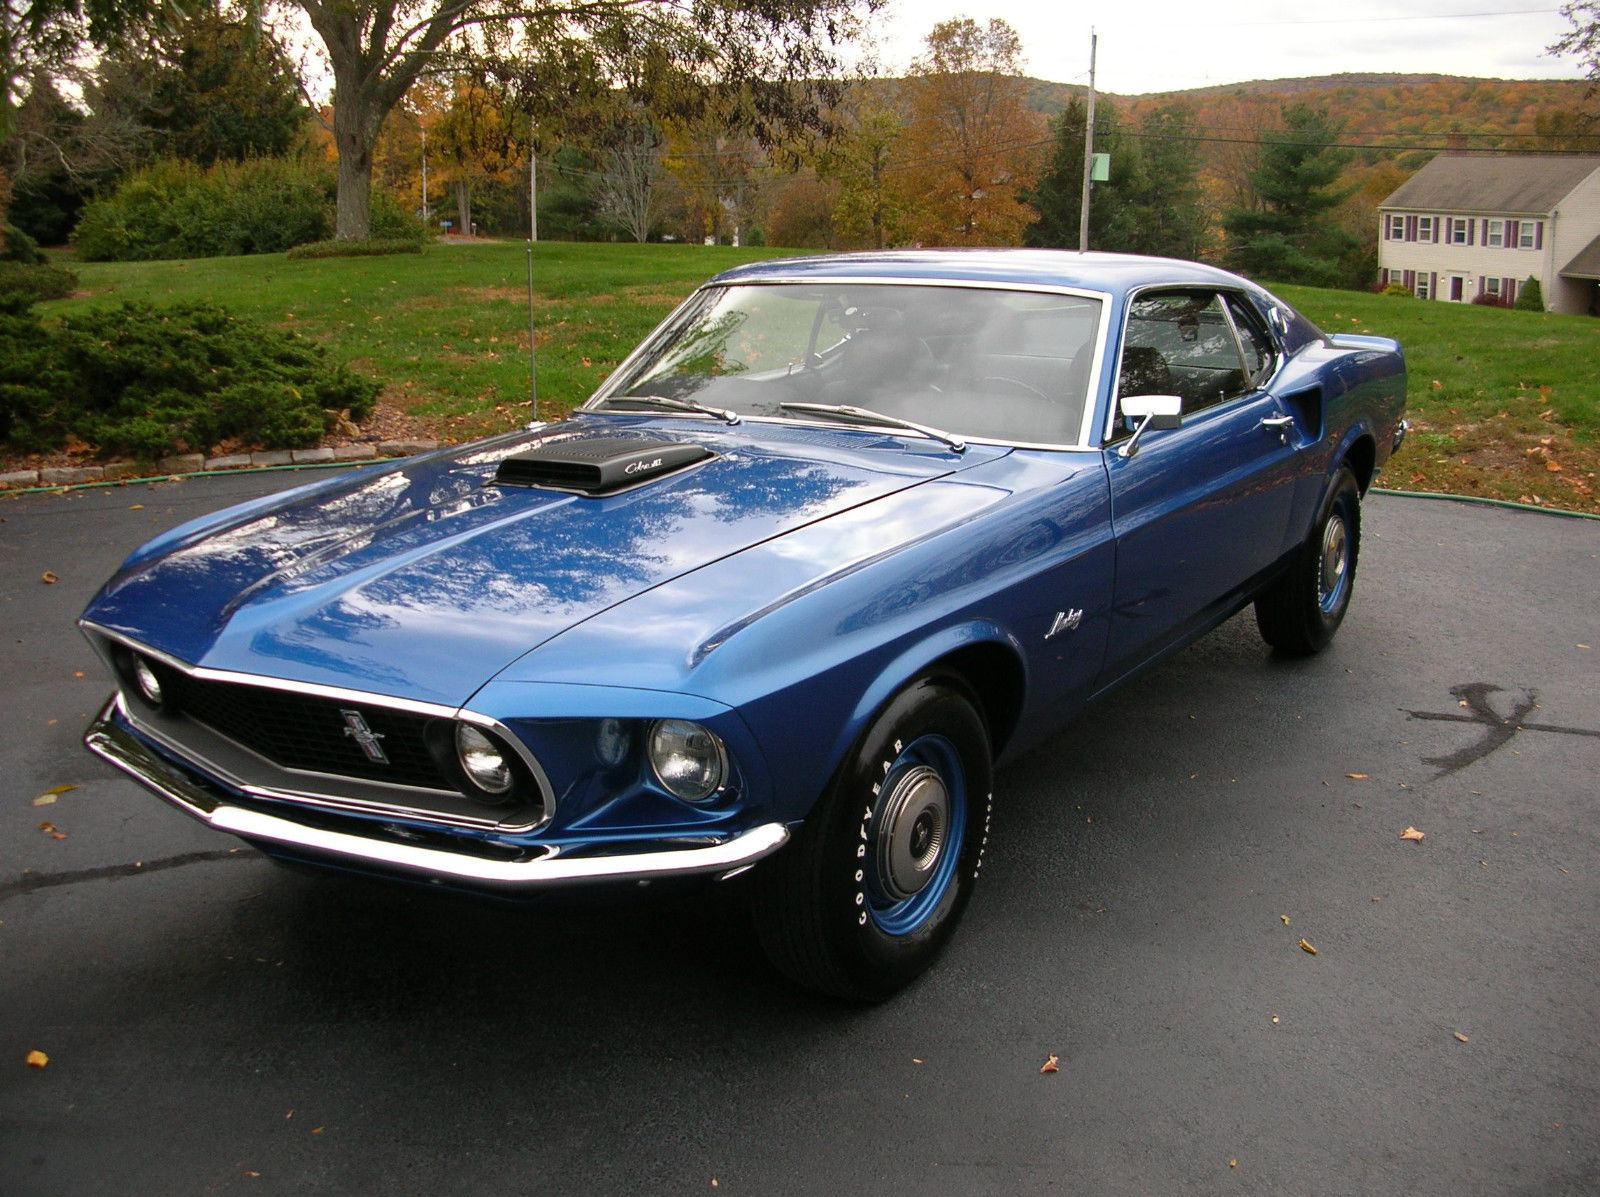 This 1969 Mustang Was Built As A Drag Strip Terror And Restored To Factory Original Goodness